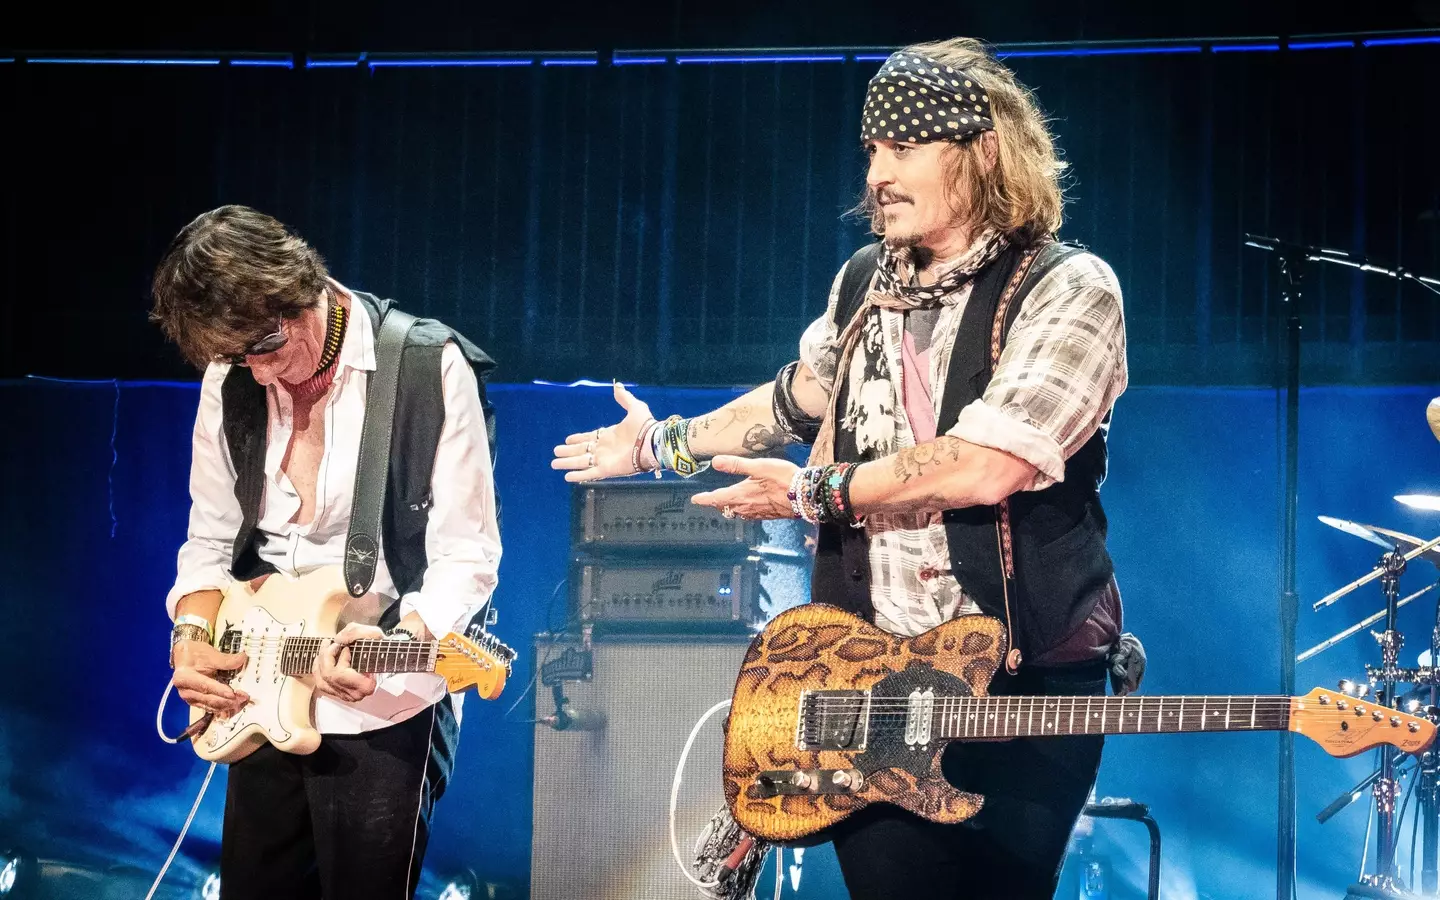 Jeff Beck with Johnny Depp in May last year.